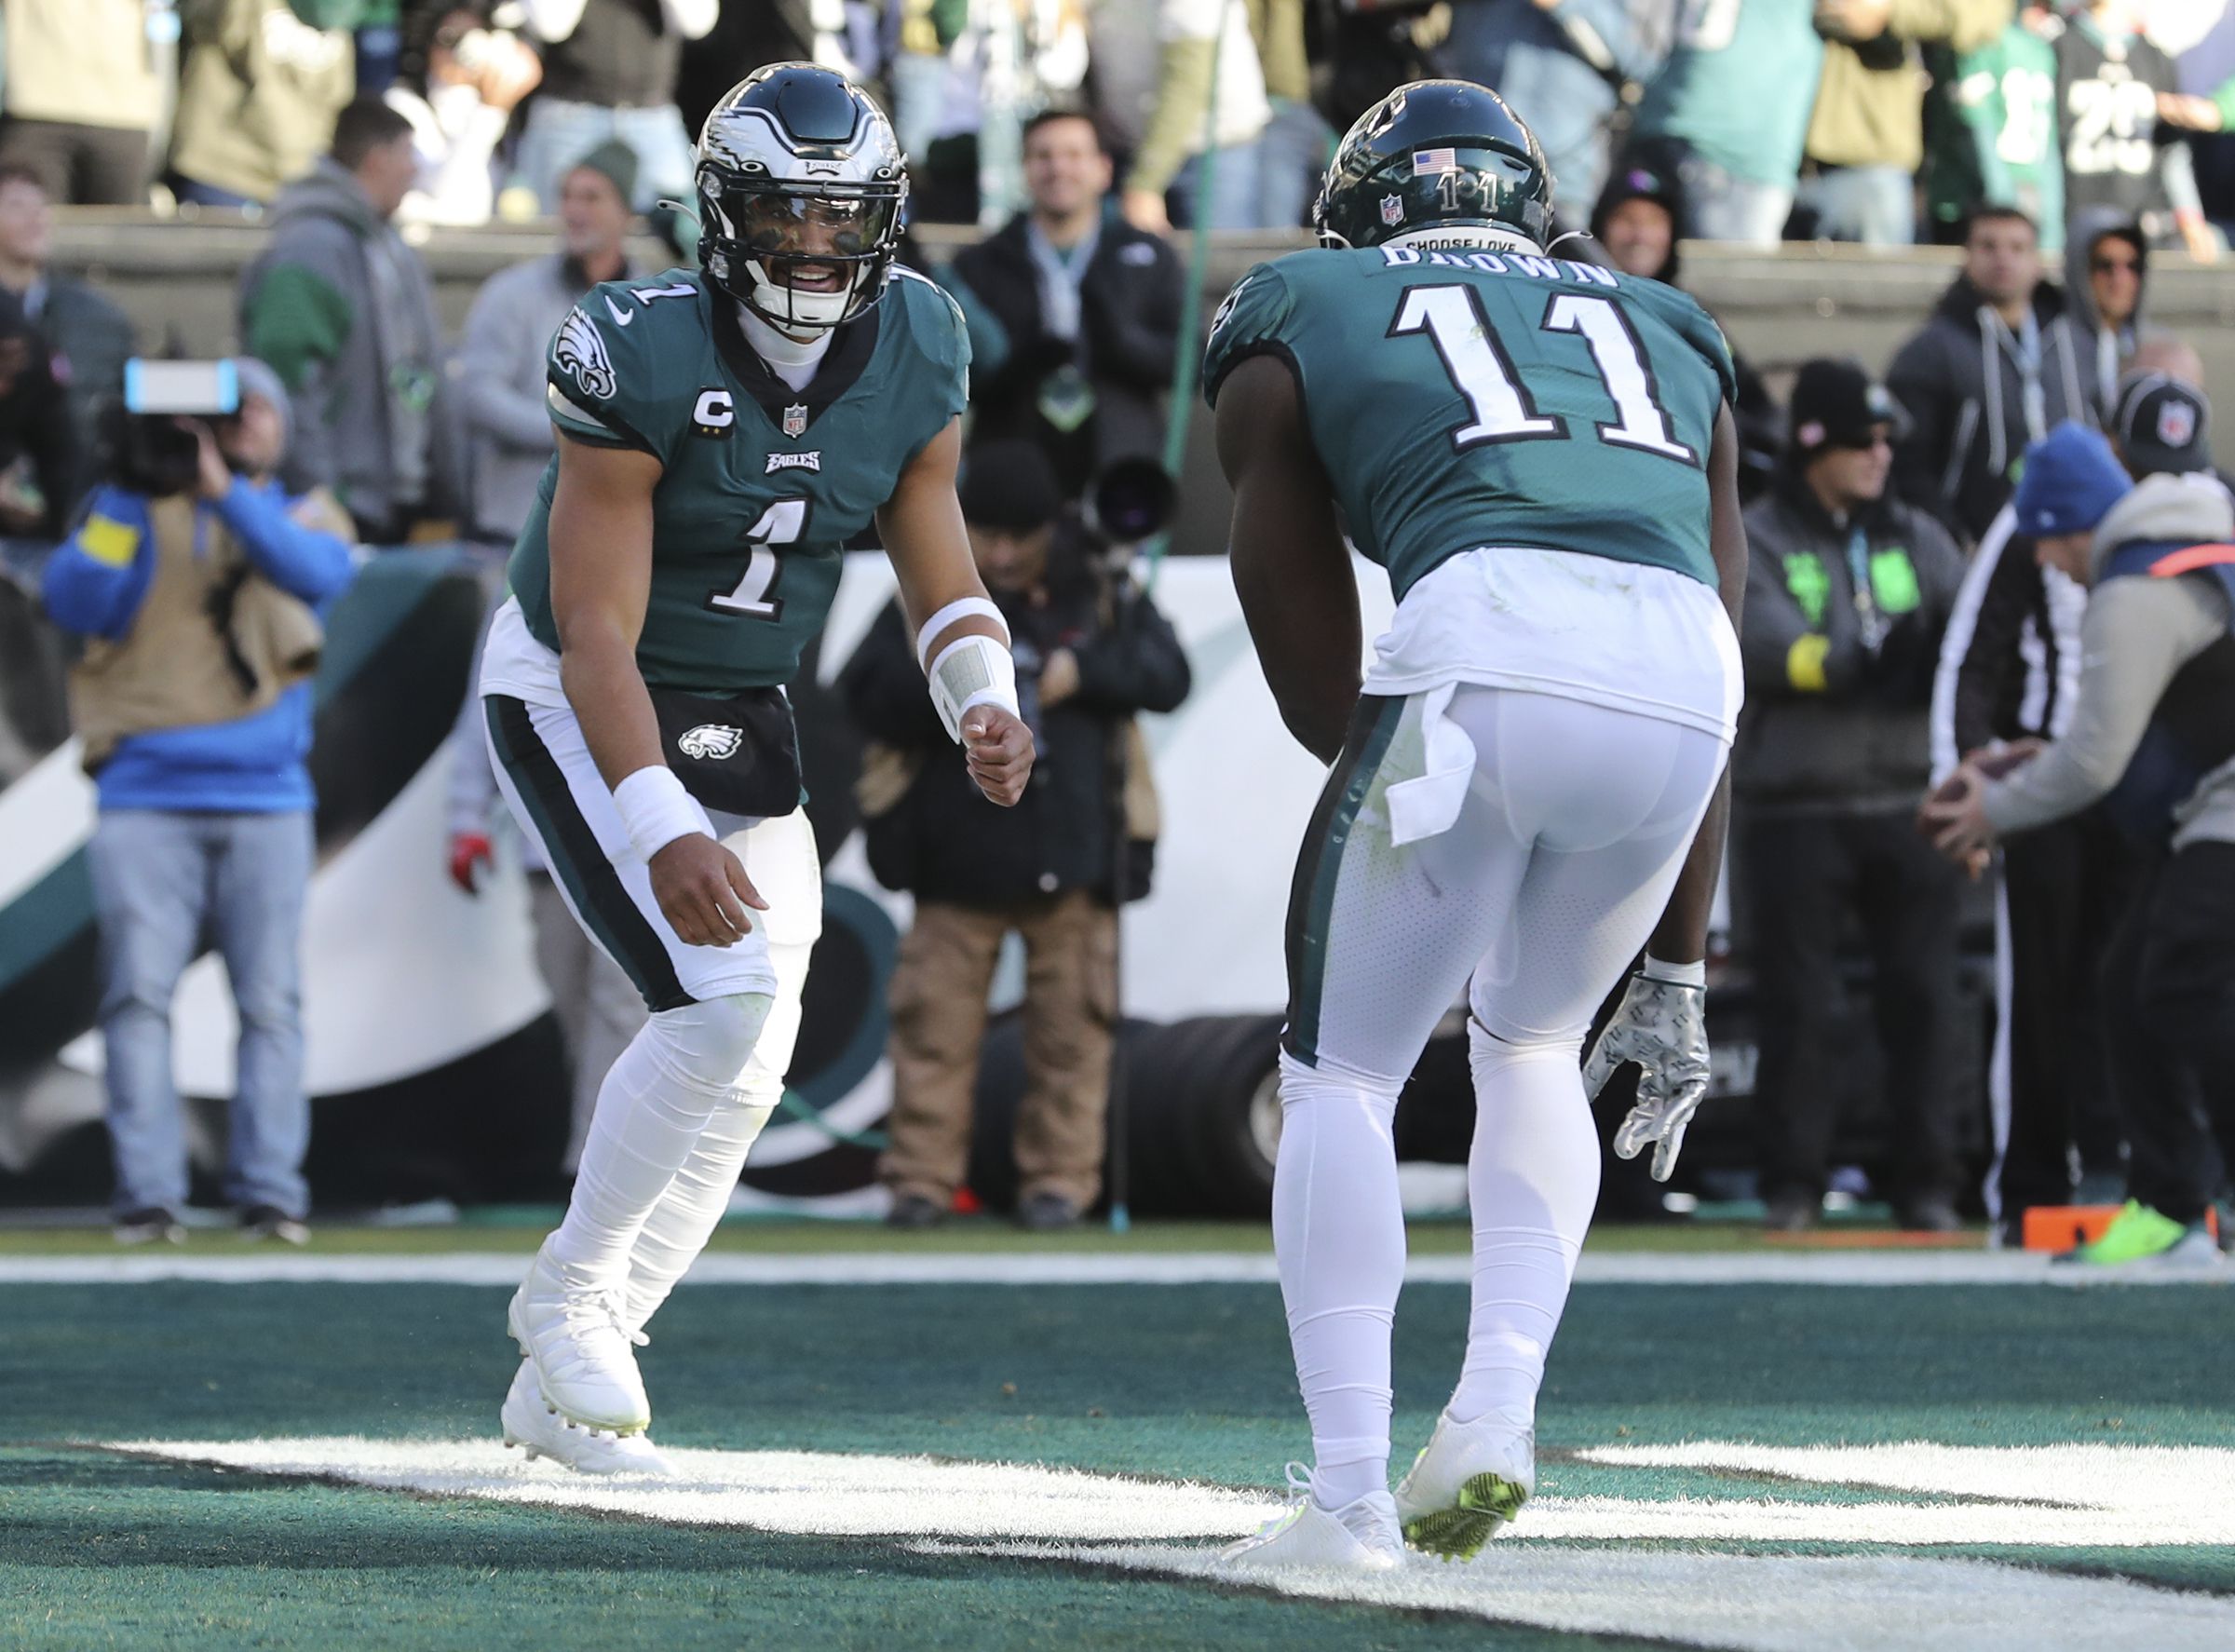 Why was AJ Brown upset despite Eagles leading Giants by a ton of points?